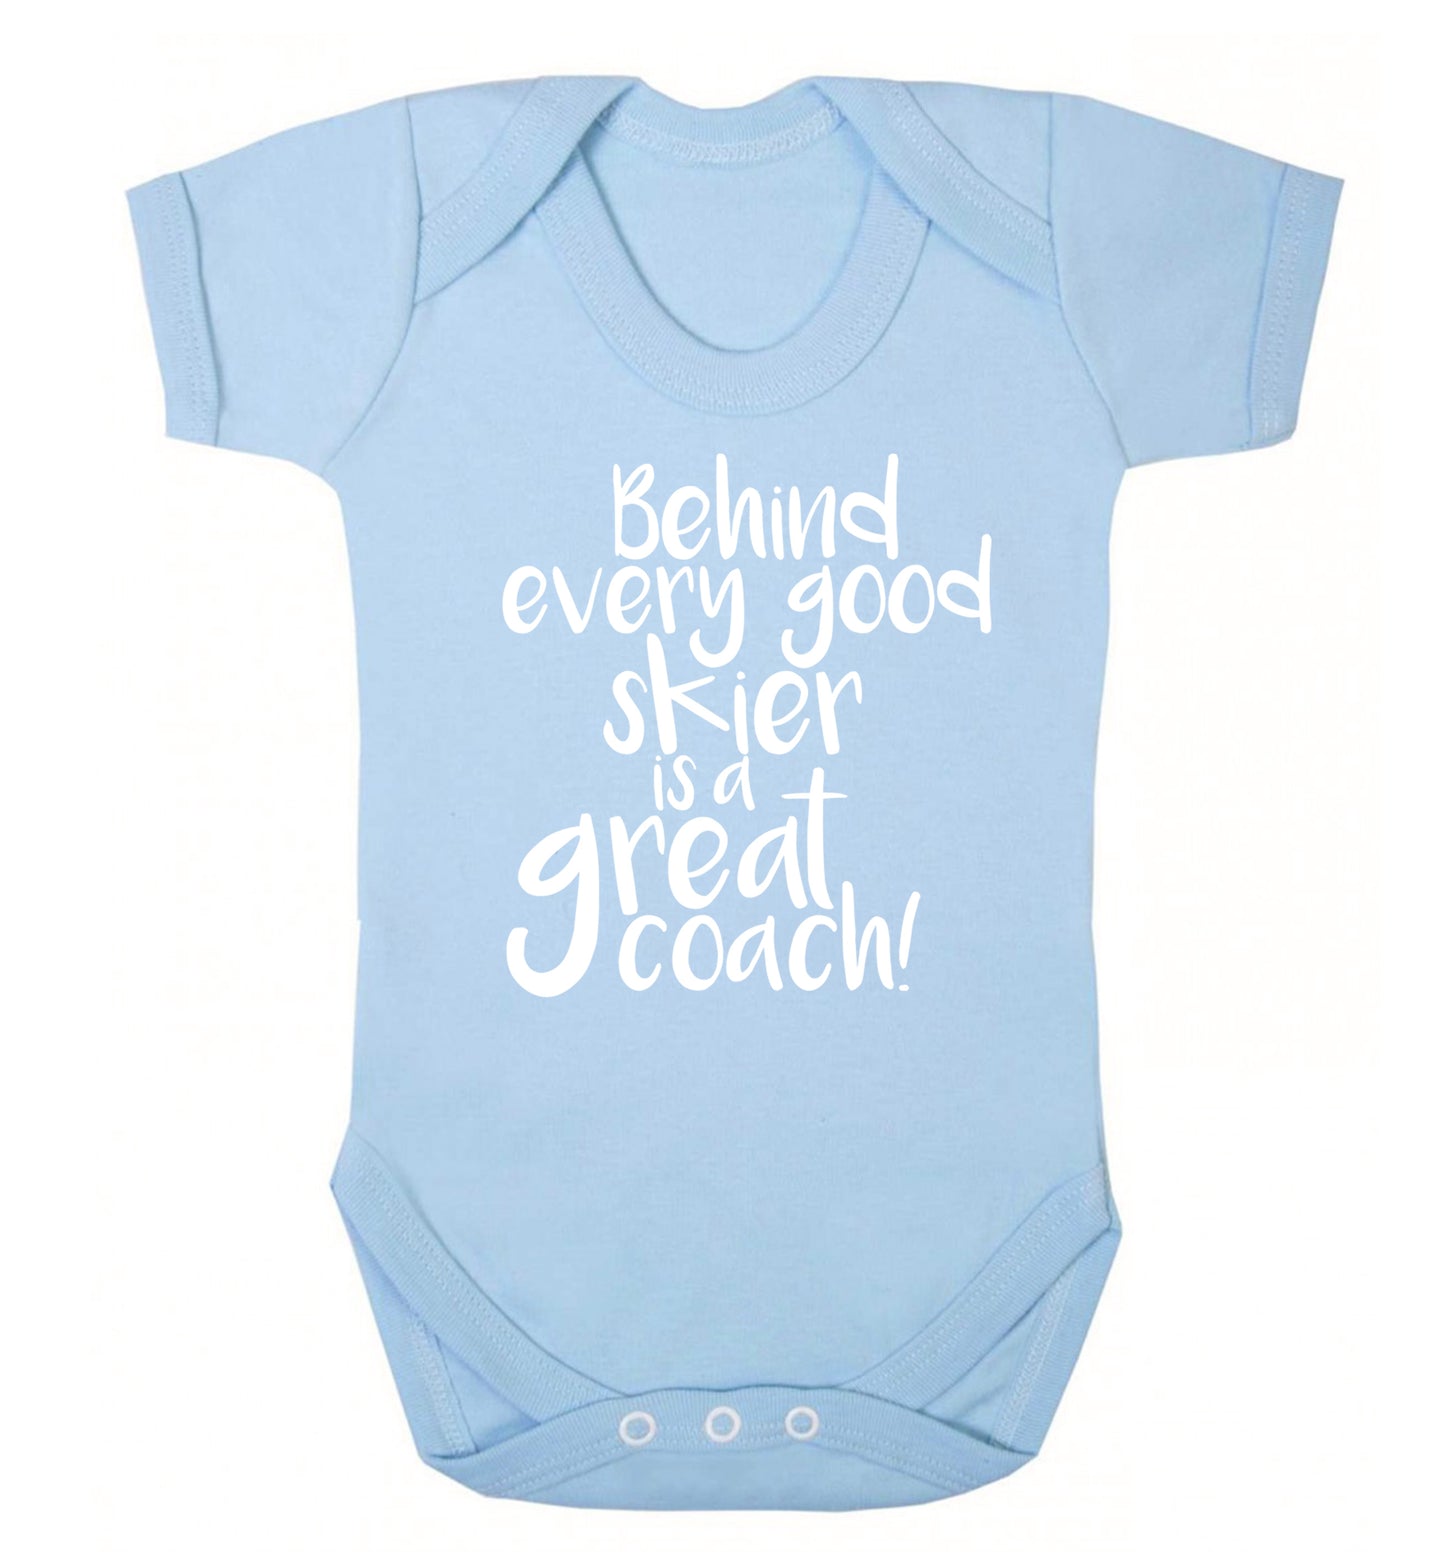 Behind every good skier is a great coach! Baby Vest pale blue 18-24 months